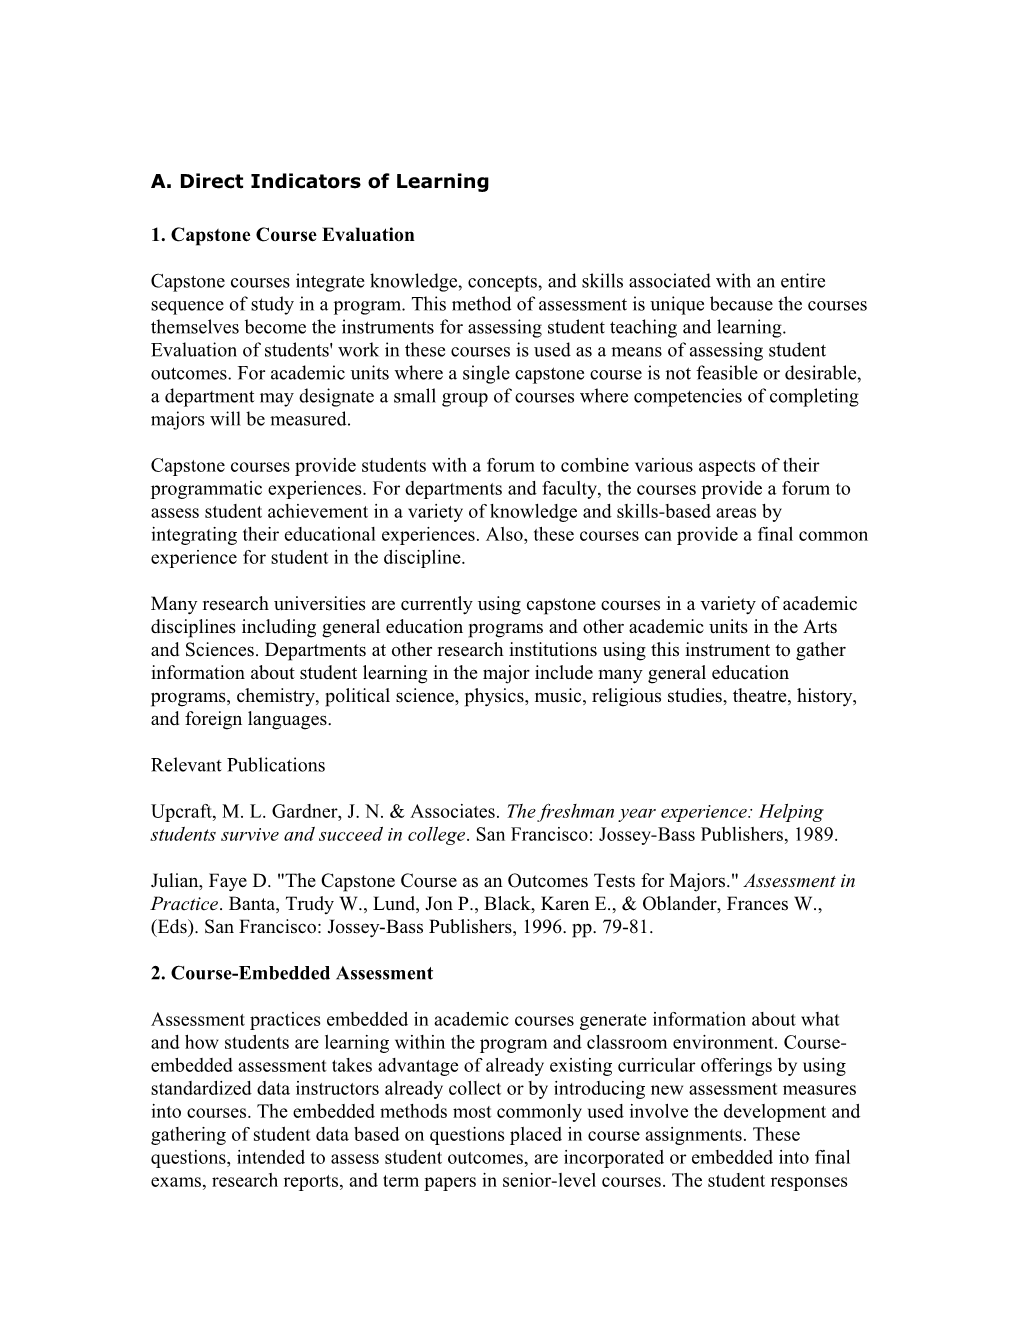 A. Direct Indicators of Learning